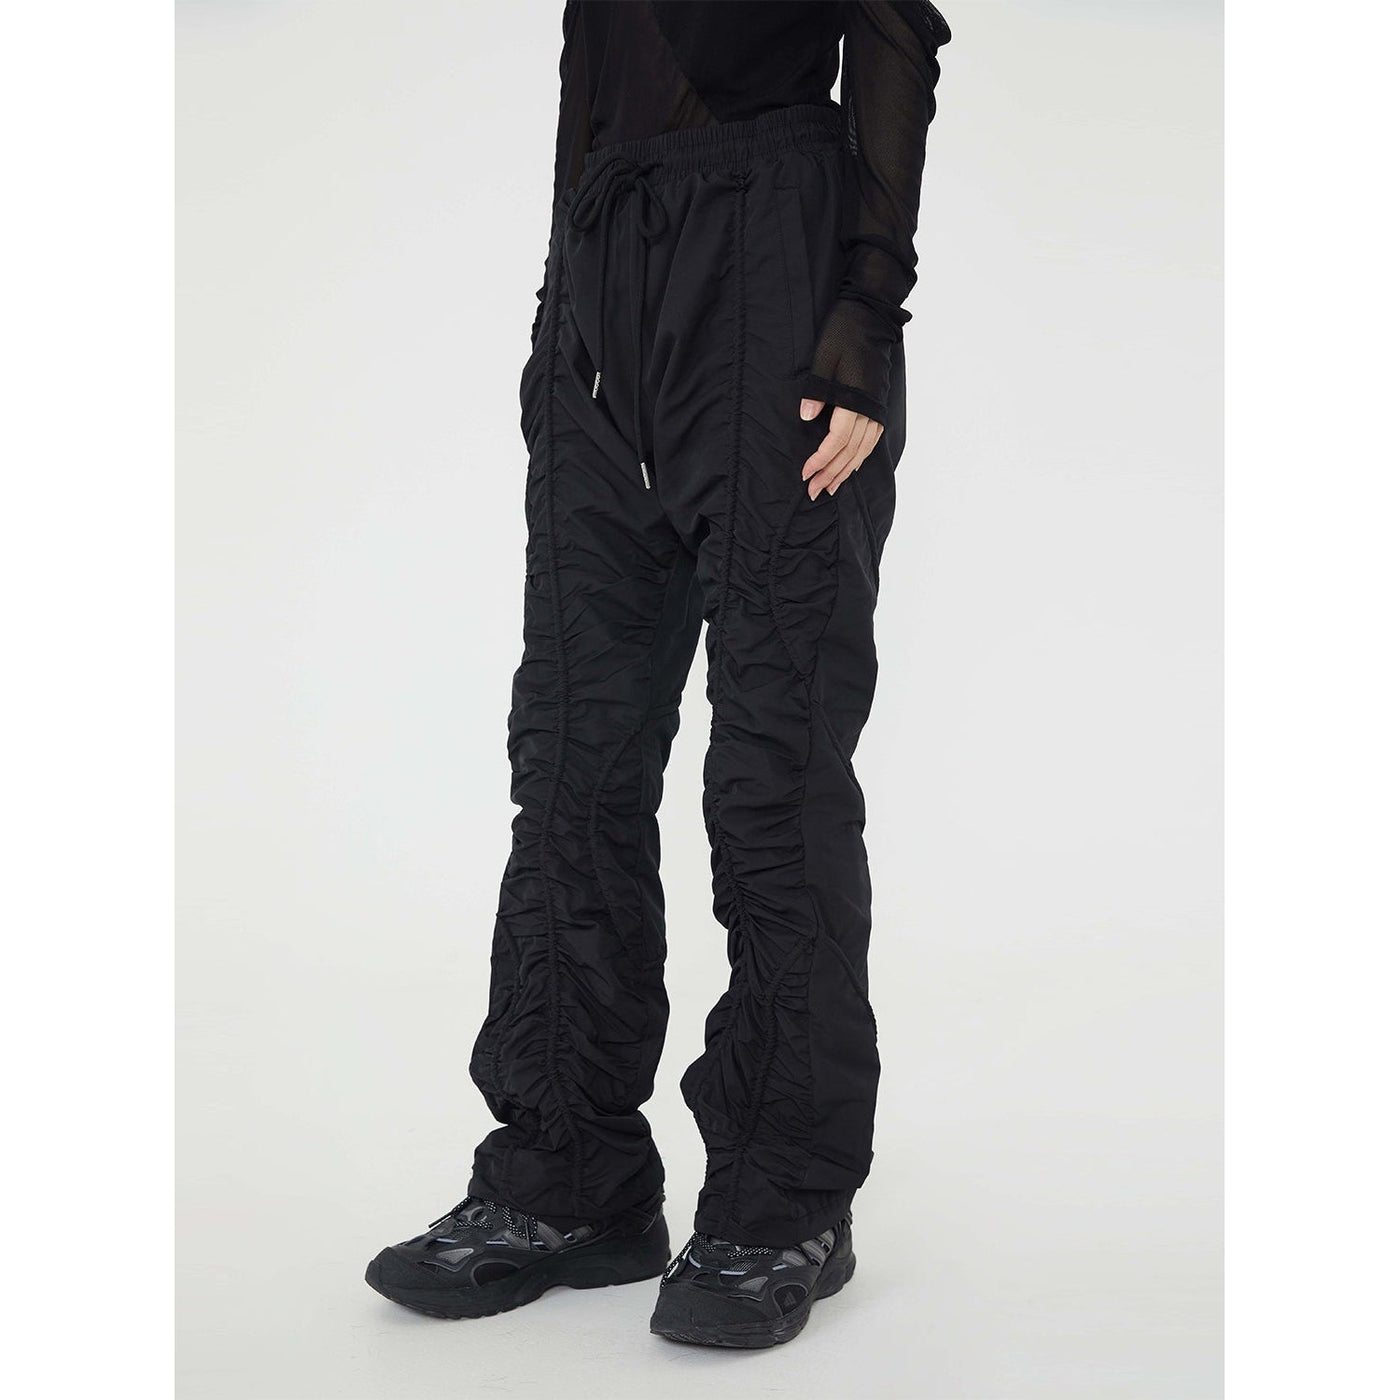 Made Extreme Straight Cut trousers Korean Street Fashion Pants By Made Extreme Shop Online at OH Vault